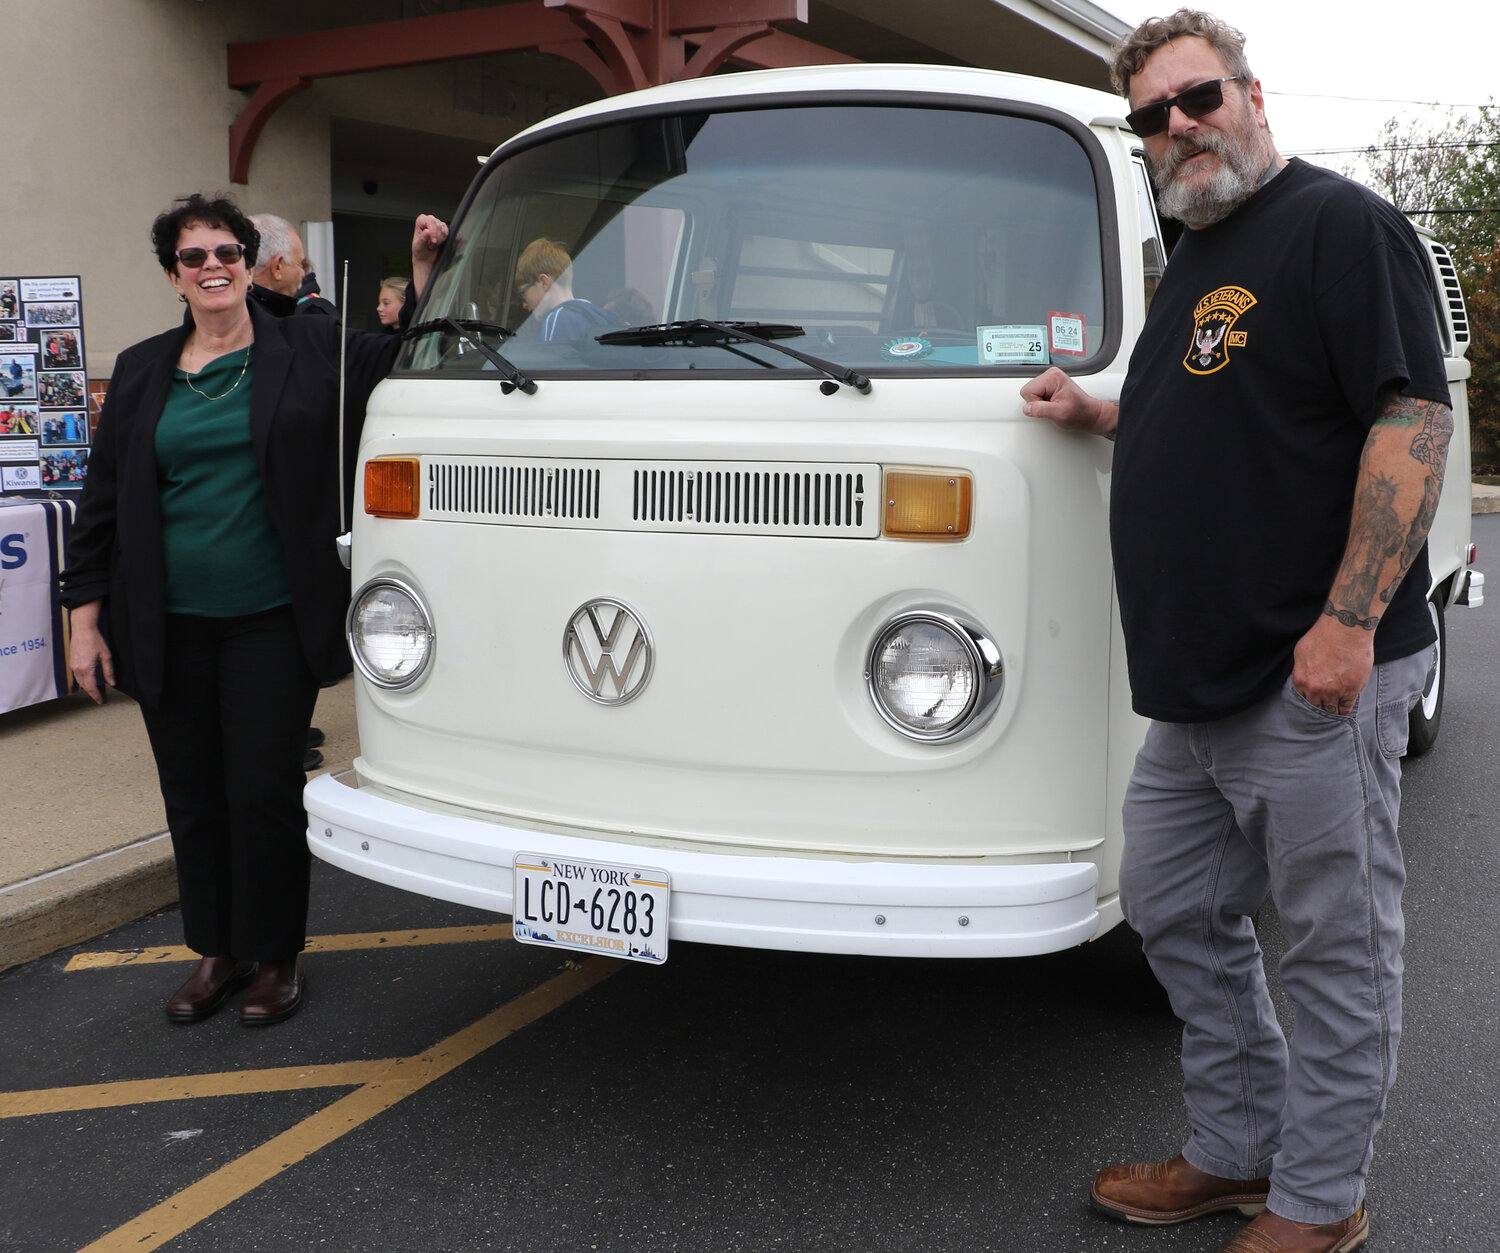 Jessica Koenig, Executive Director of IP Library with Frank Woehling admired the 73’ Volkswagon Bus.